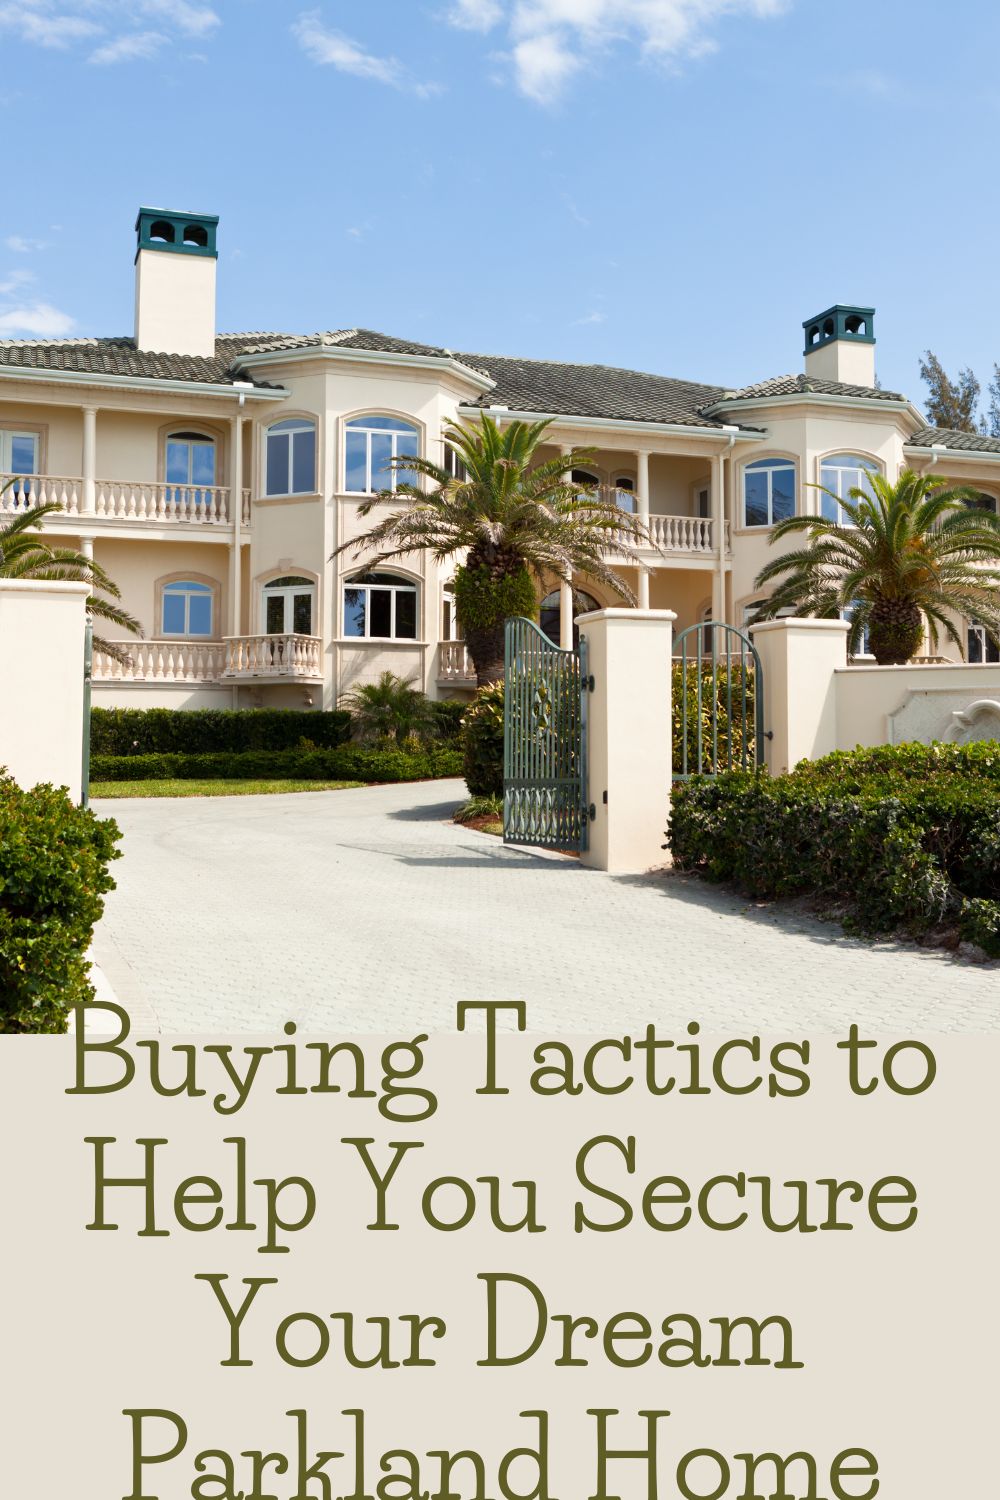 Buying Tactics to Help You Secure Your Dream Parkland Home